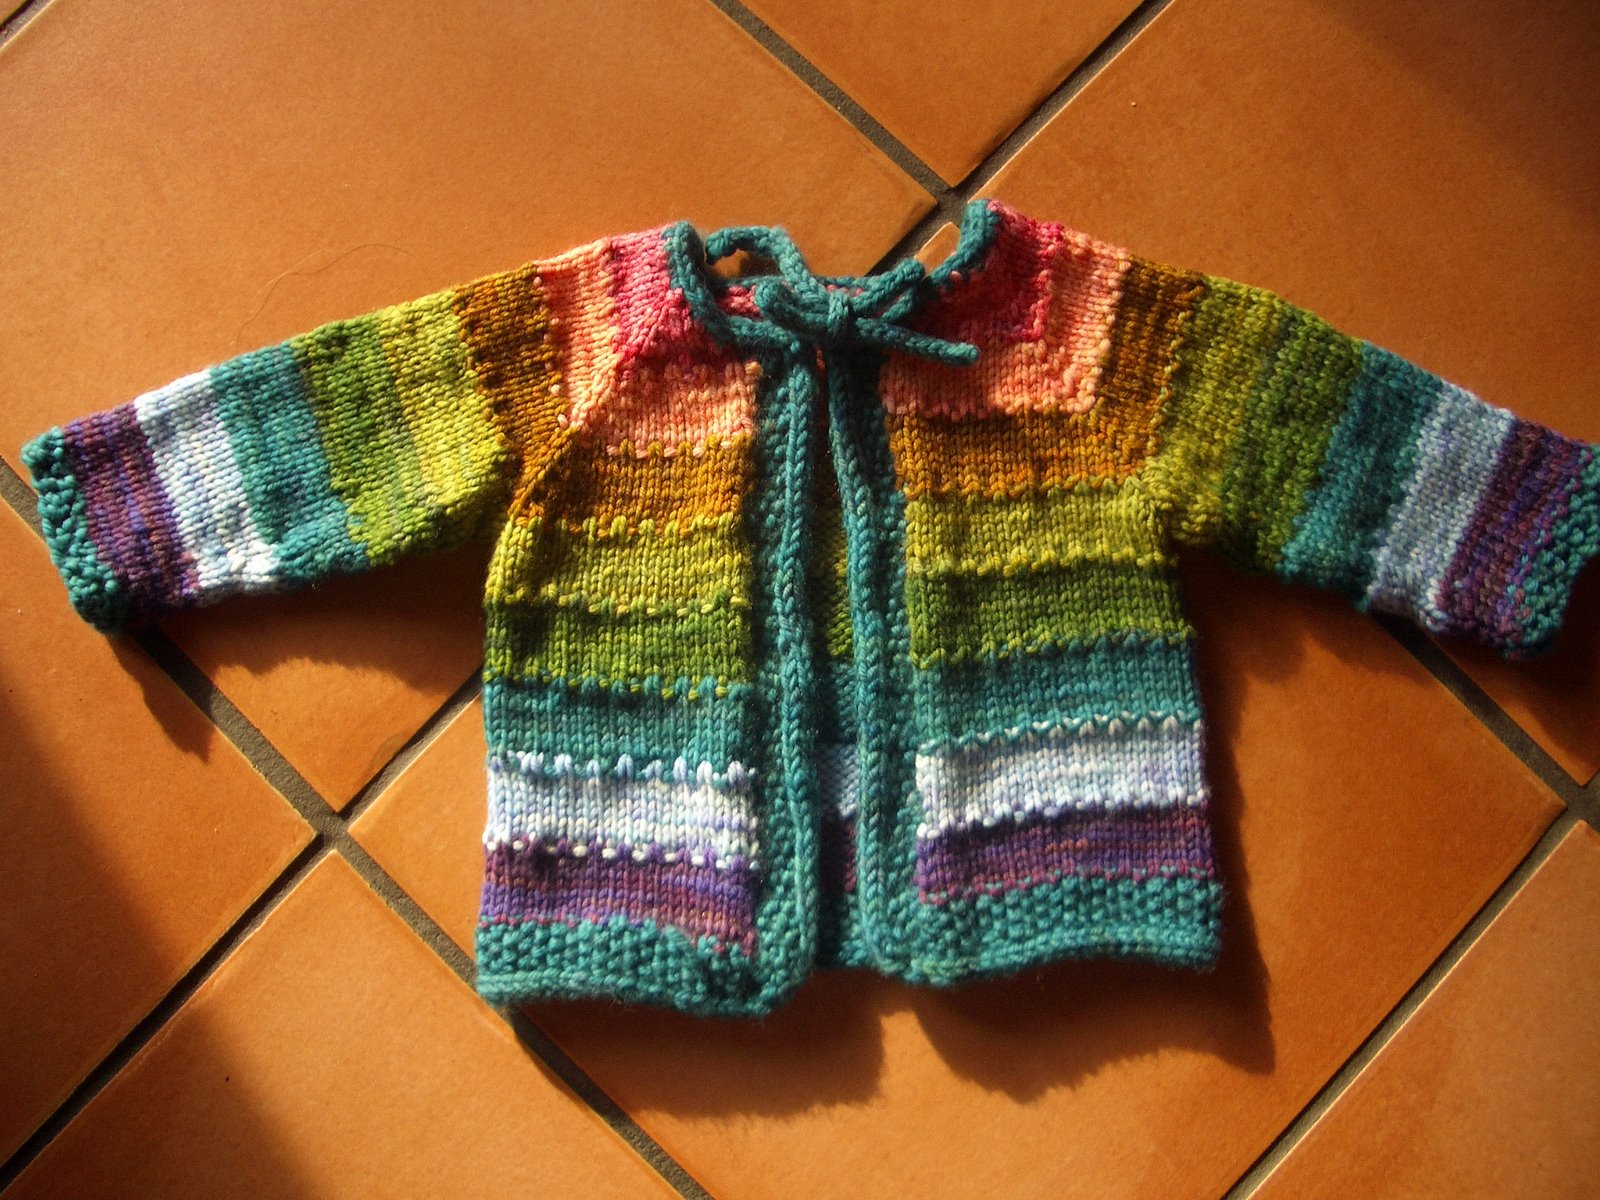 ta-da! one Tulip Cardigan, properly finished this time